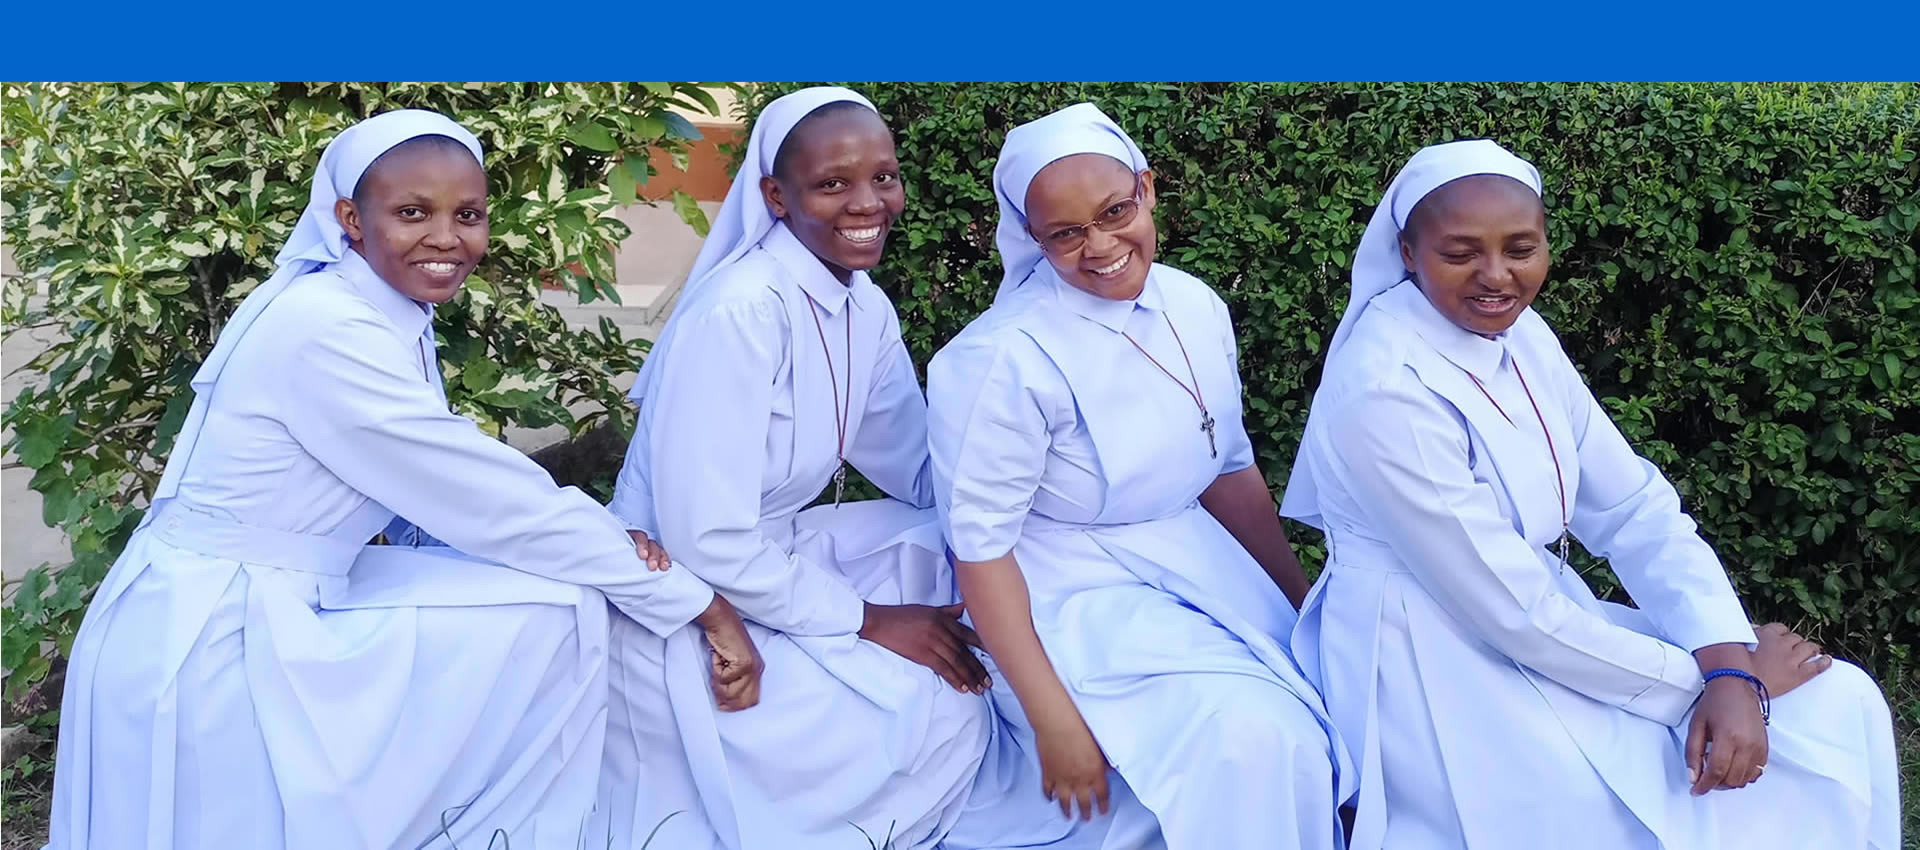 Sisters of St. Joseph run a number of Schools and vocational training centers.